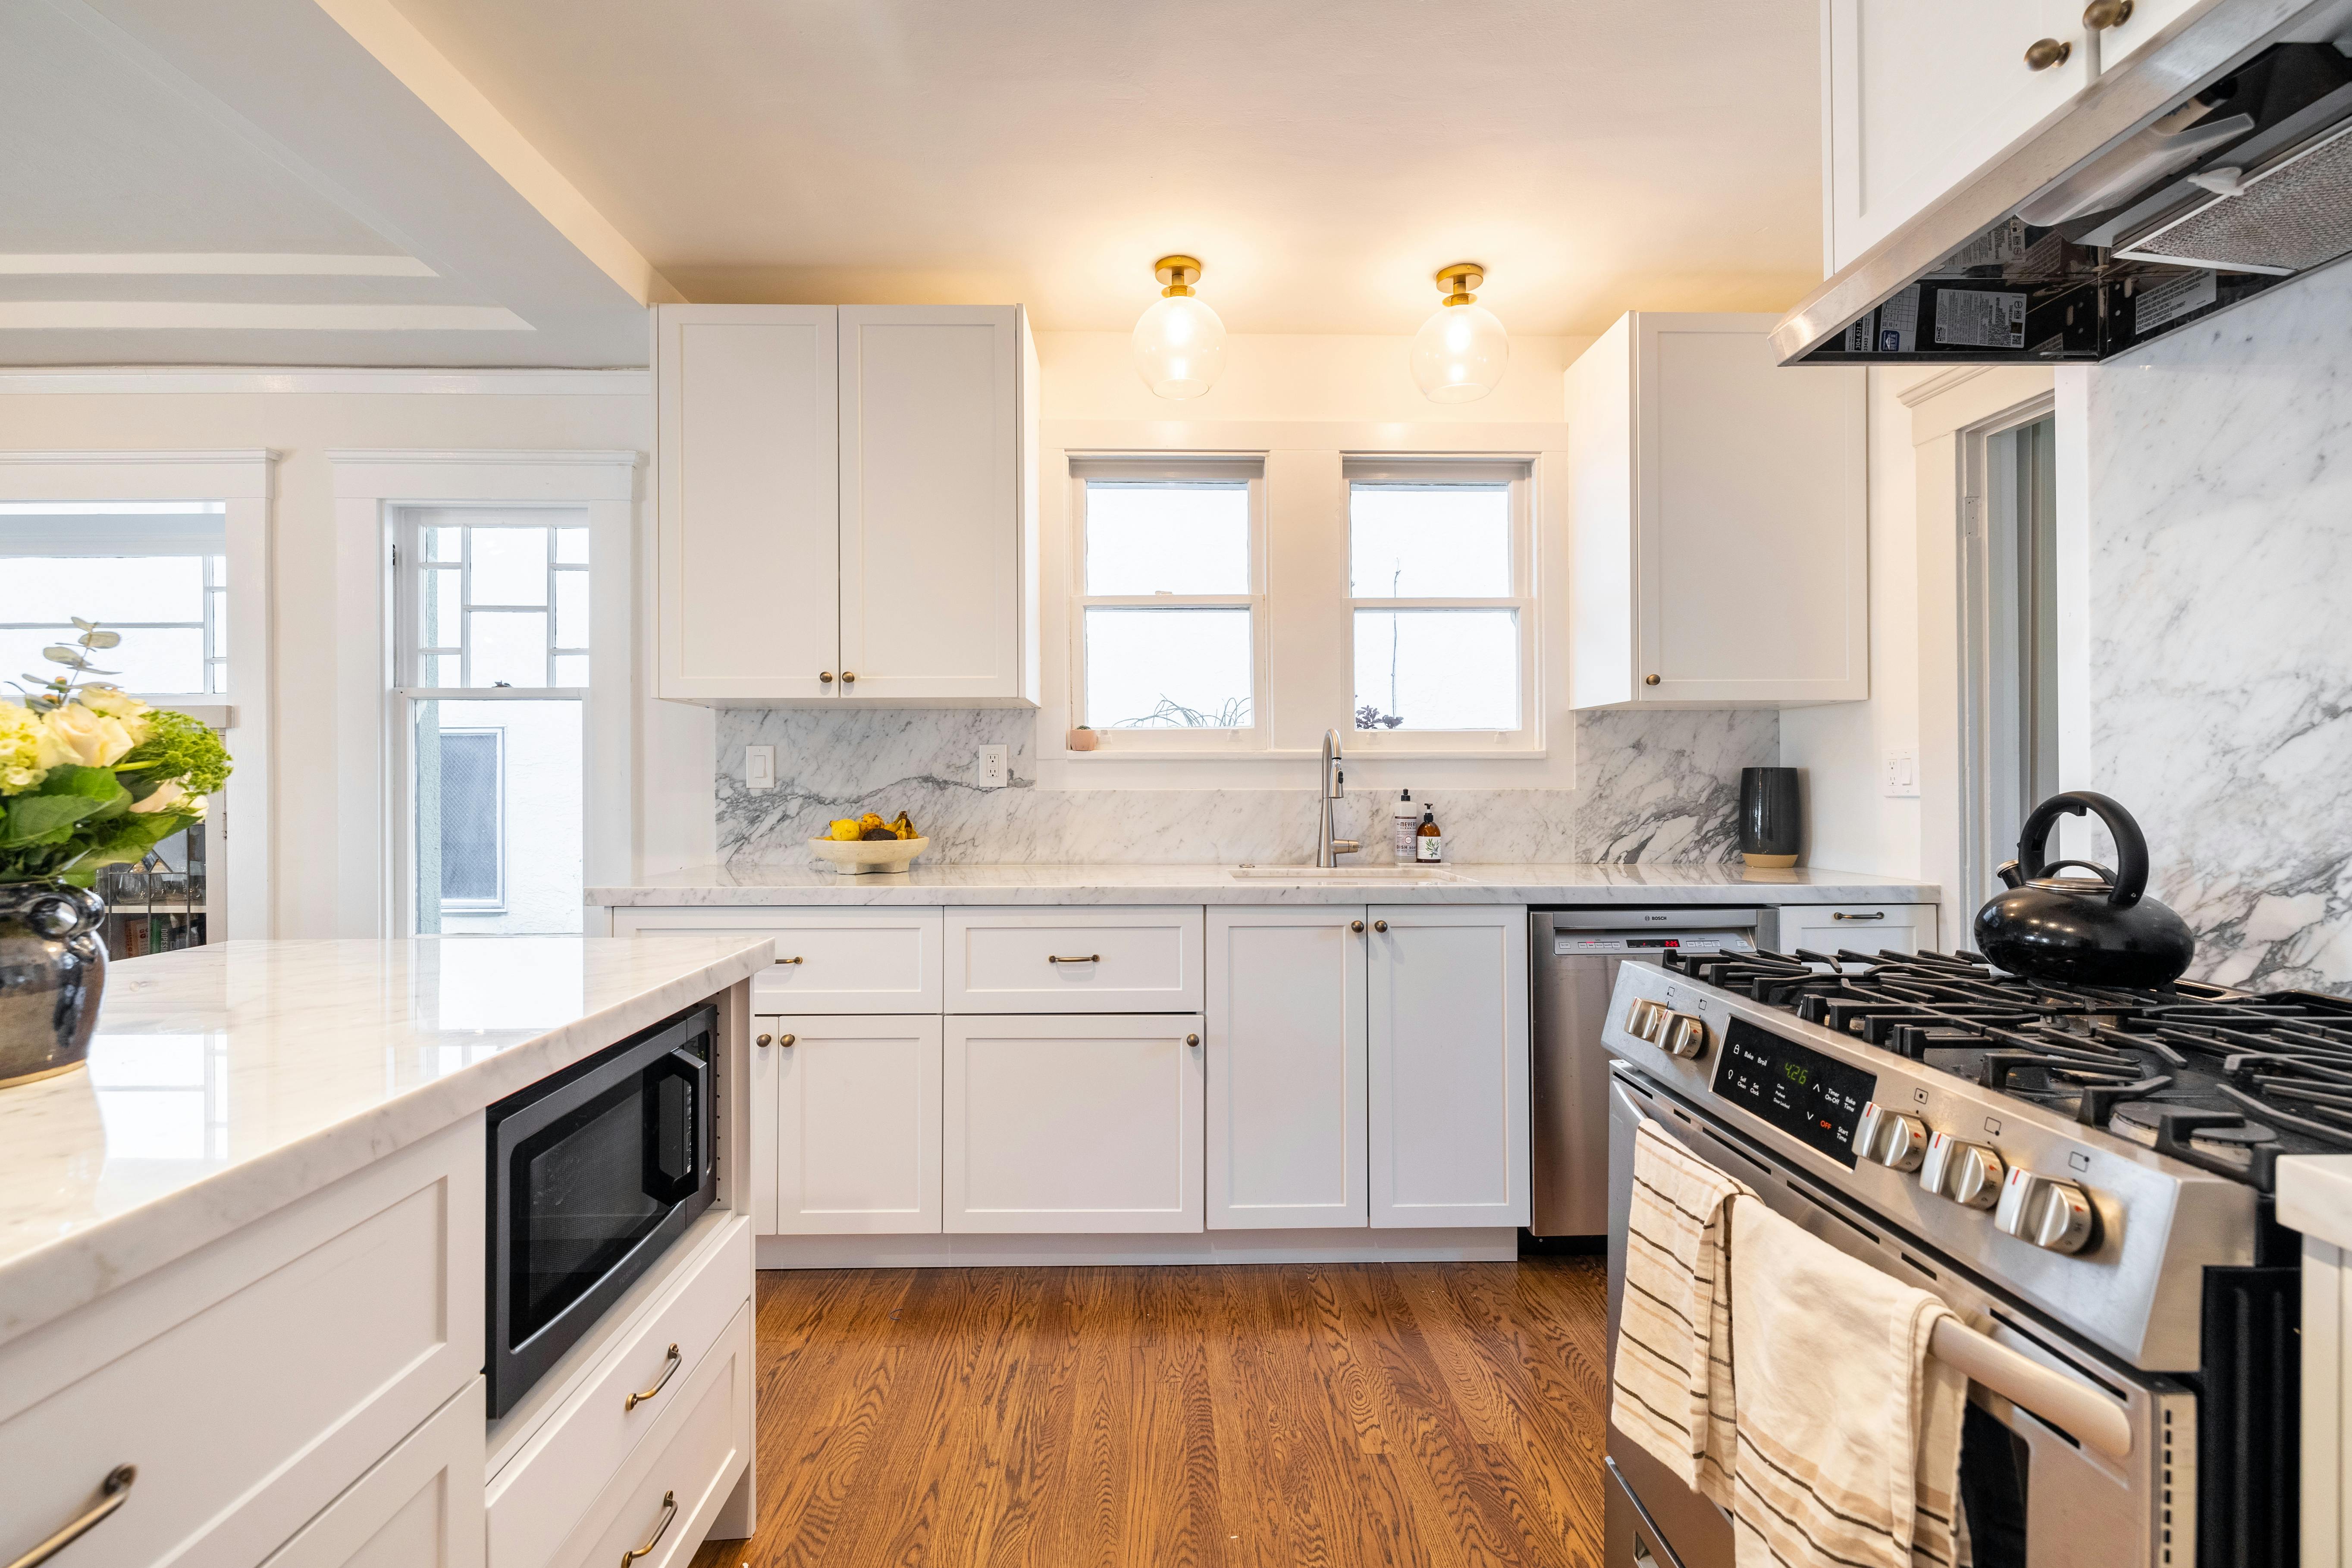 Fundamental Kitchen Design Guidelines to Know Before You Remodel